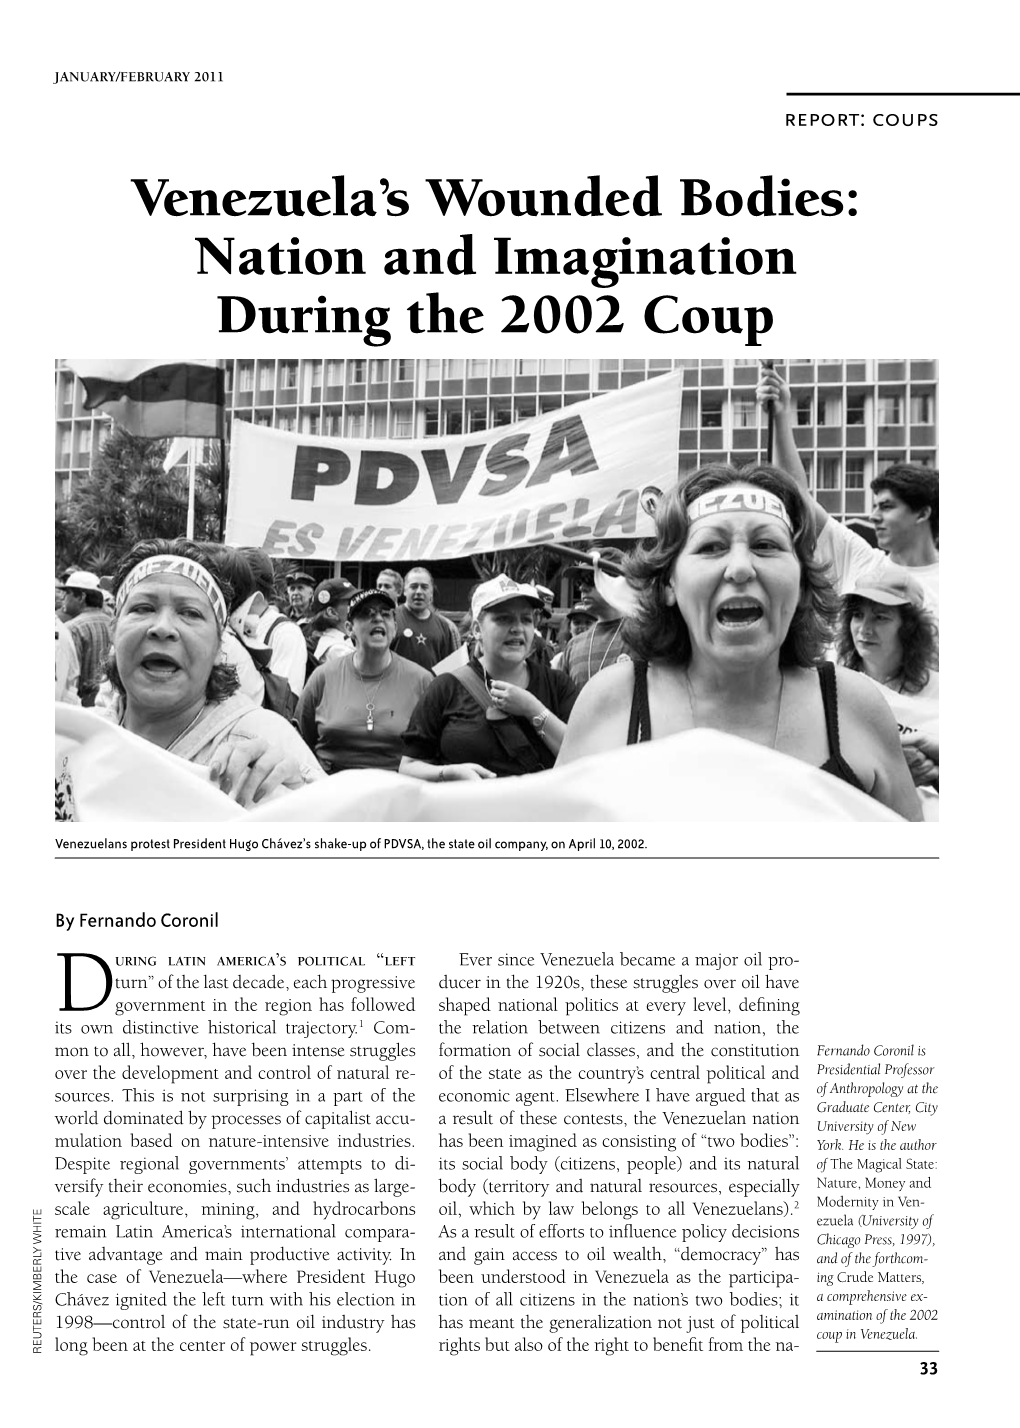 Nation and Imagination During the 2002 Coup